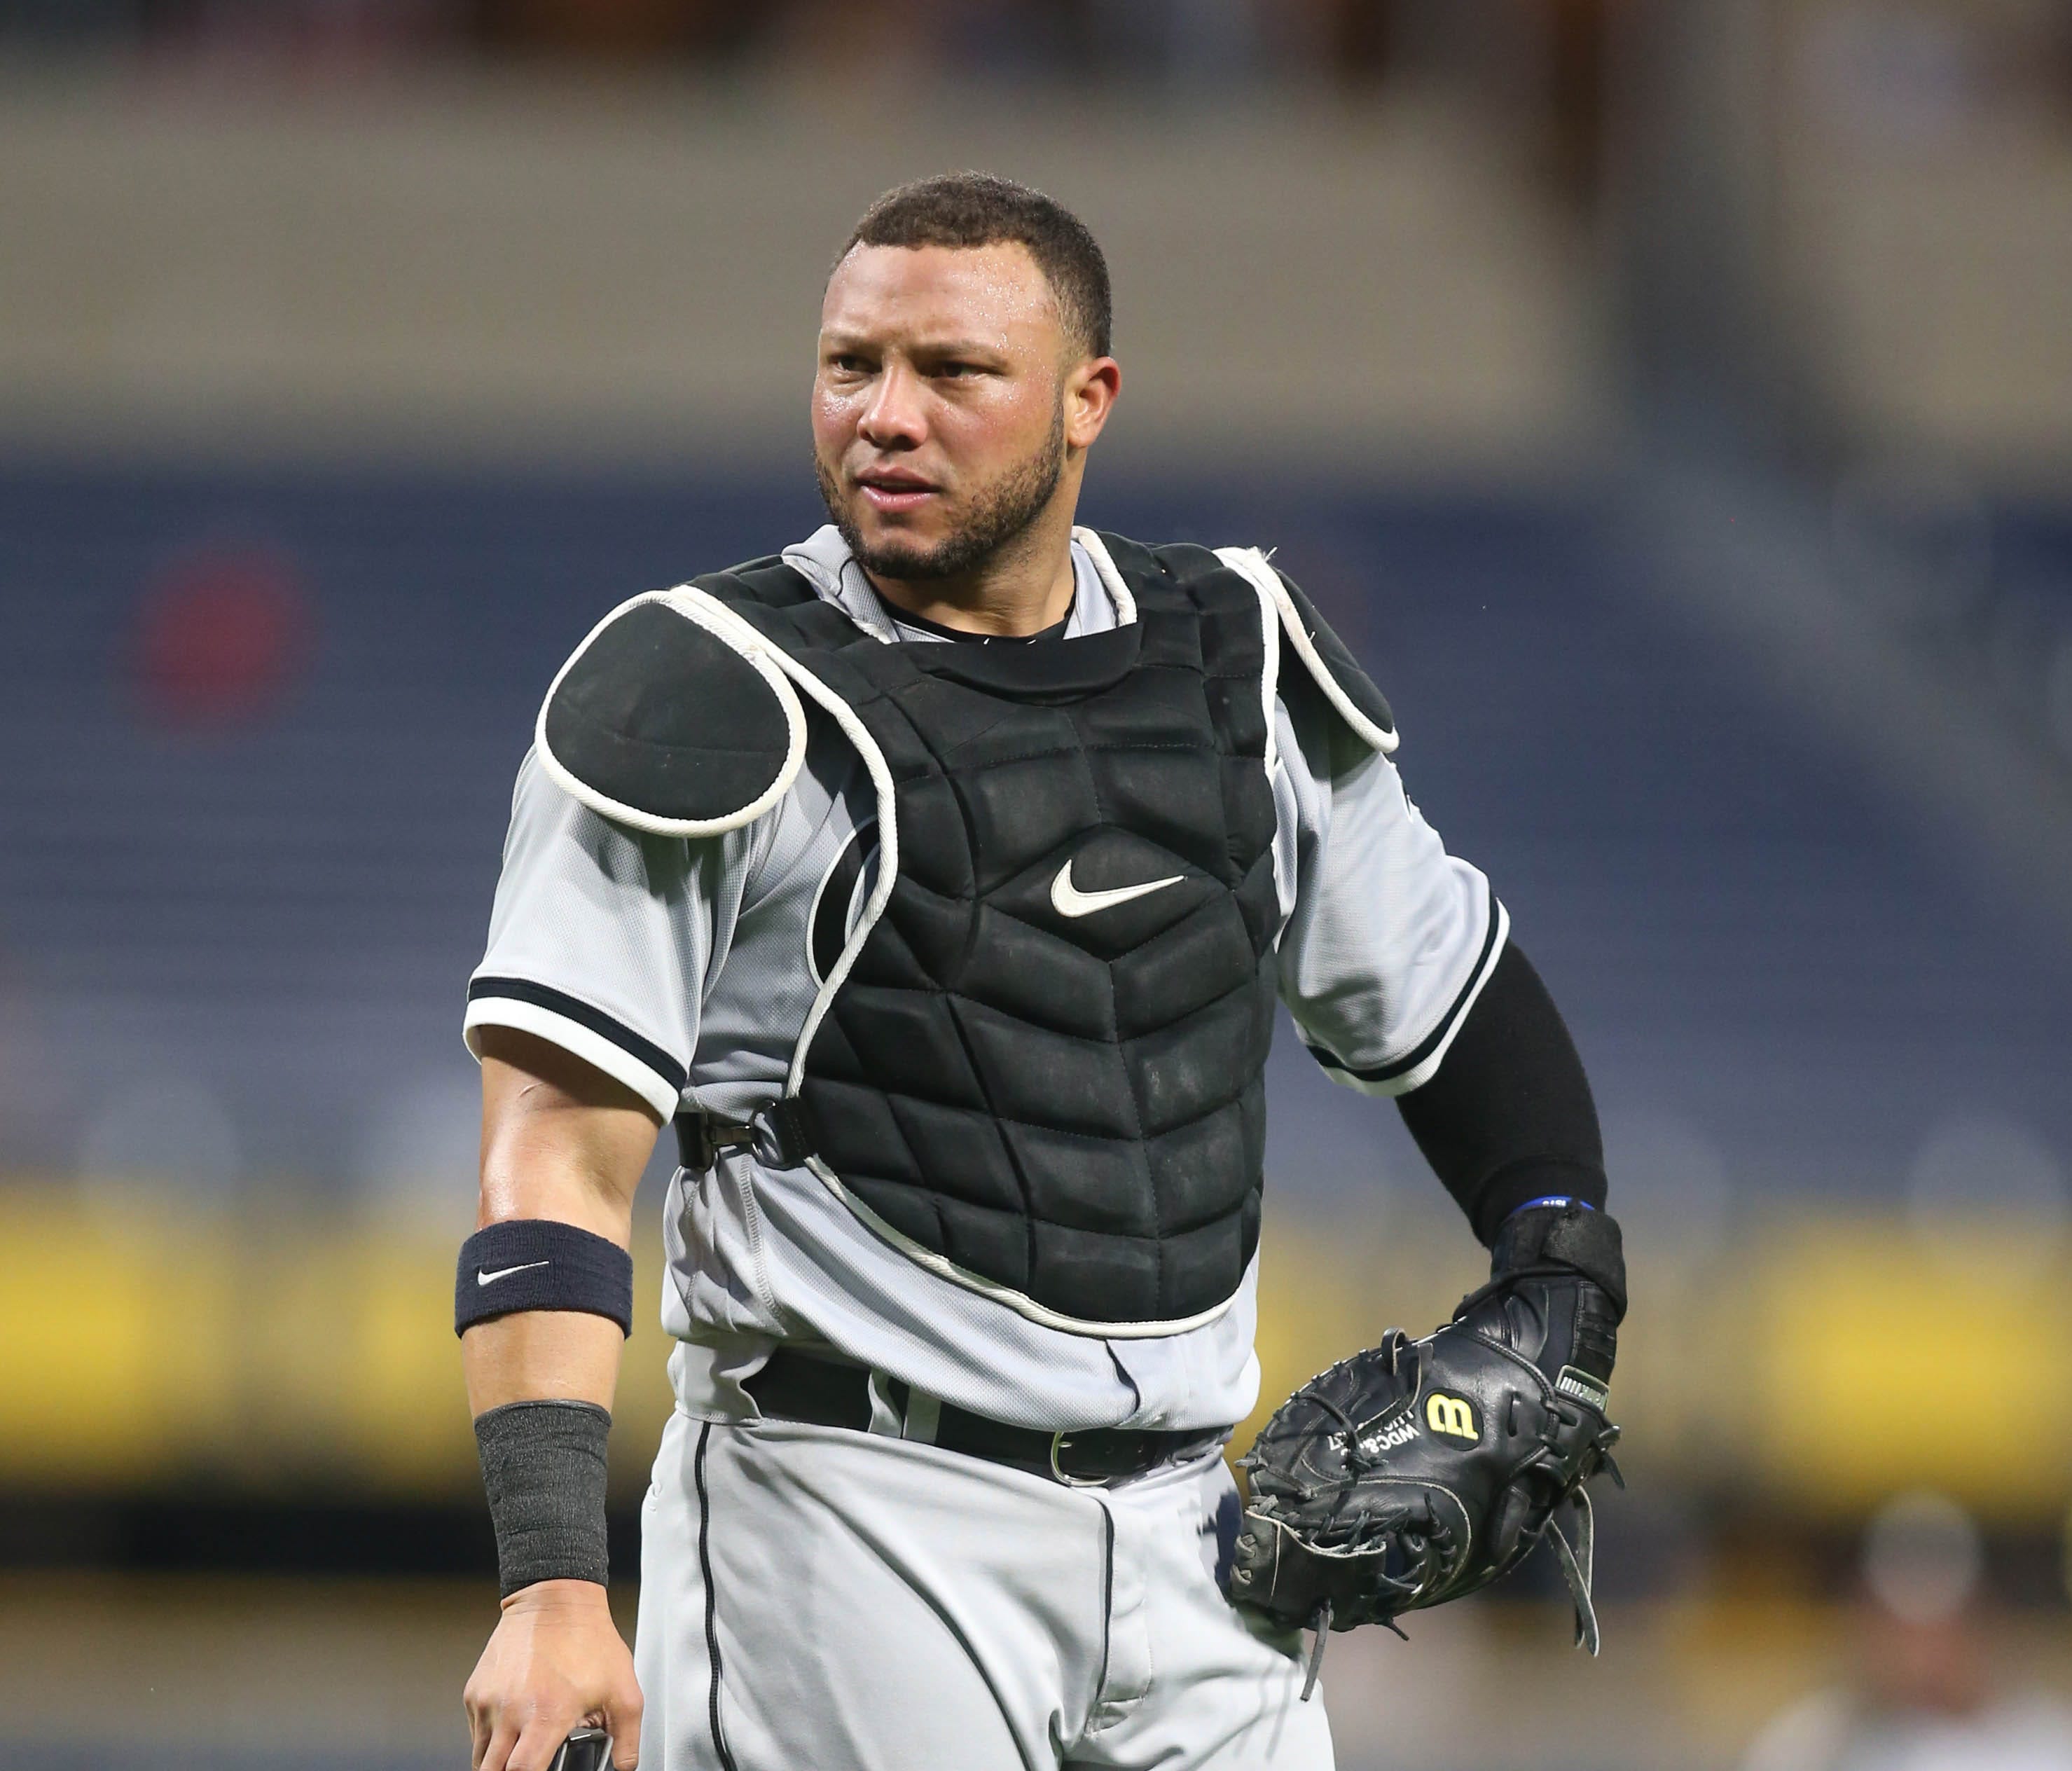 Welington Castillo, 31, is batting .270 with six home runs and 15 RBI in his first season with the White Sox.